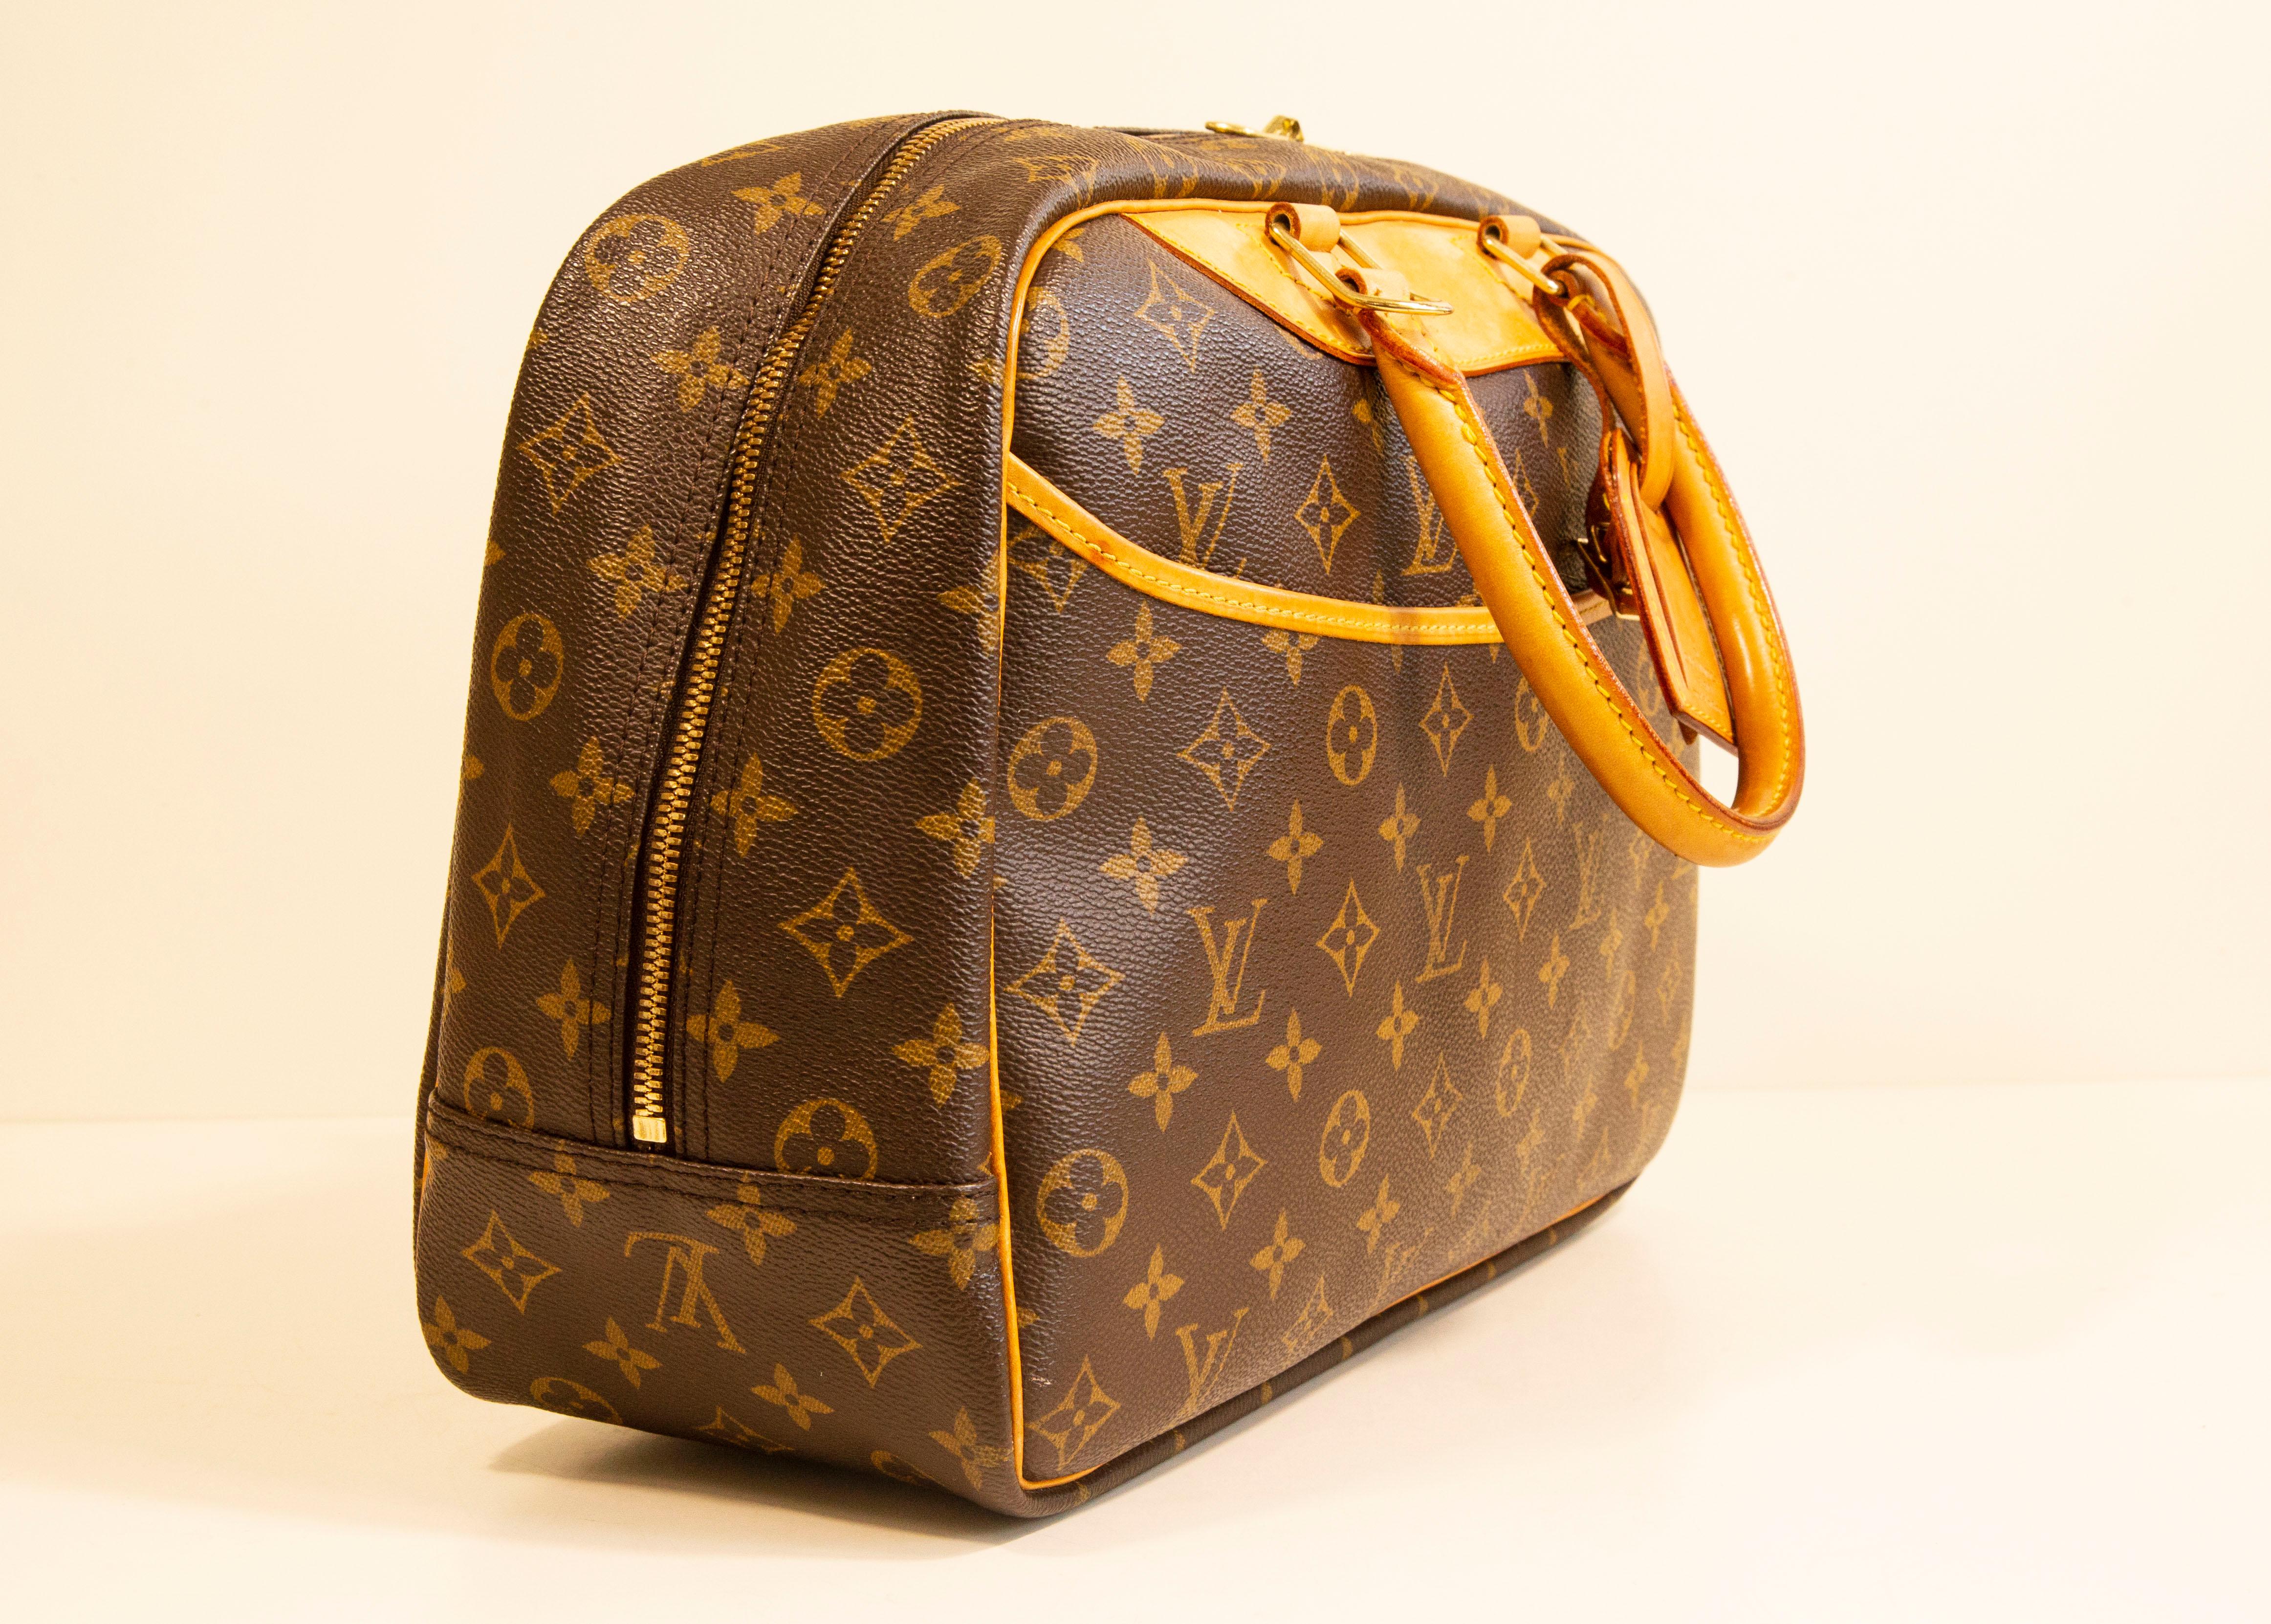 A vintage Deauville handbag by Louis Vuitton. The bag is made of brown monogram vinyl coated canvas with beige/light brown Vachetta leather trim and brass toned hardware. The interior is lined with beige synthetic fabric, and next to the major